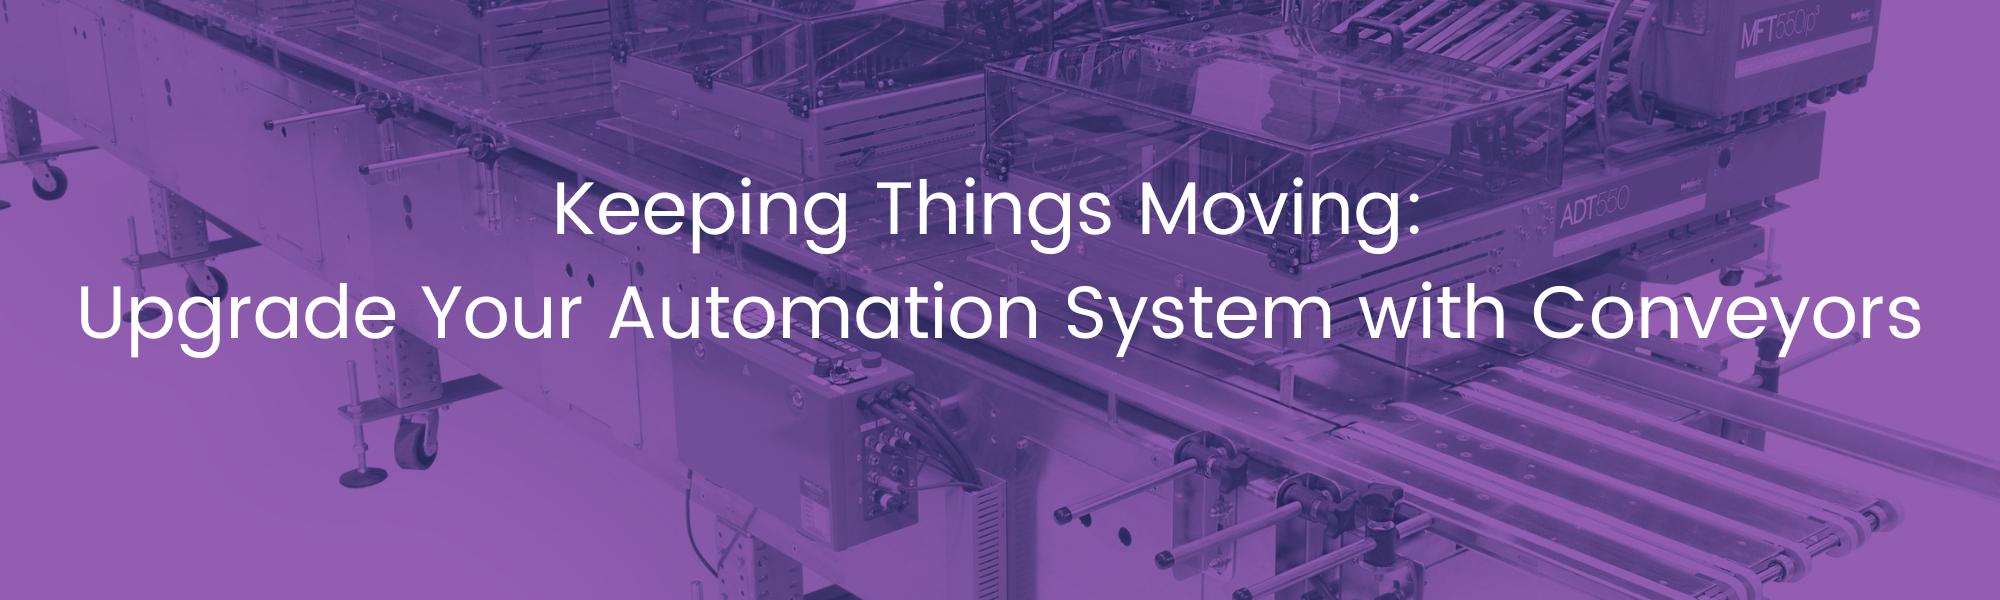 Text: Keeping Things Moving: Upgrade Your Automation System with Conveyors